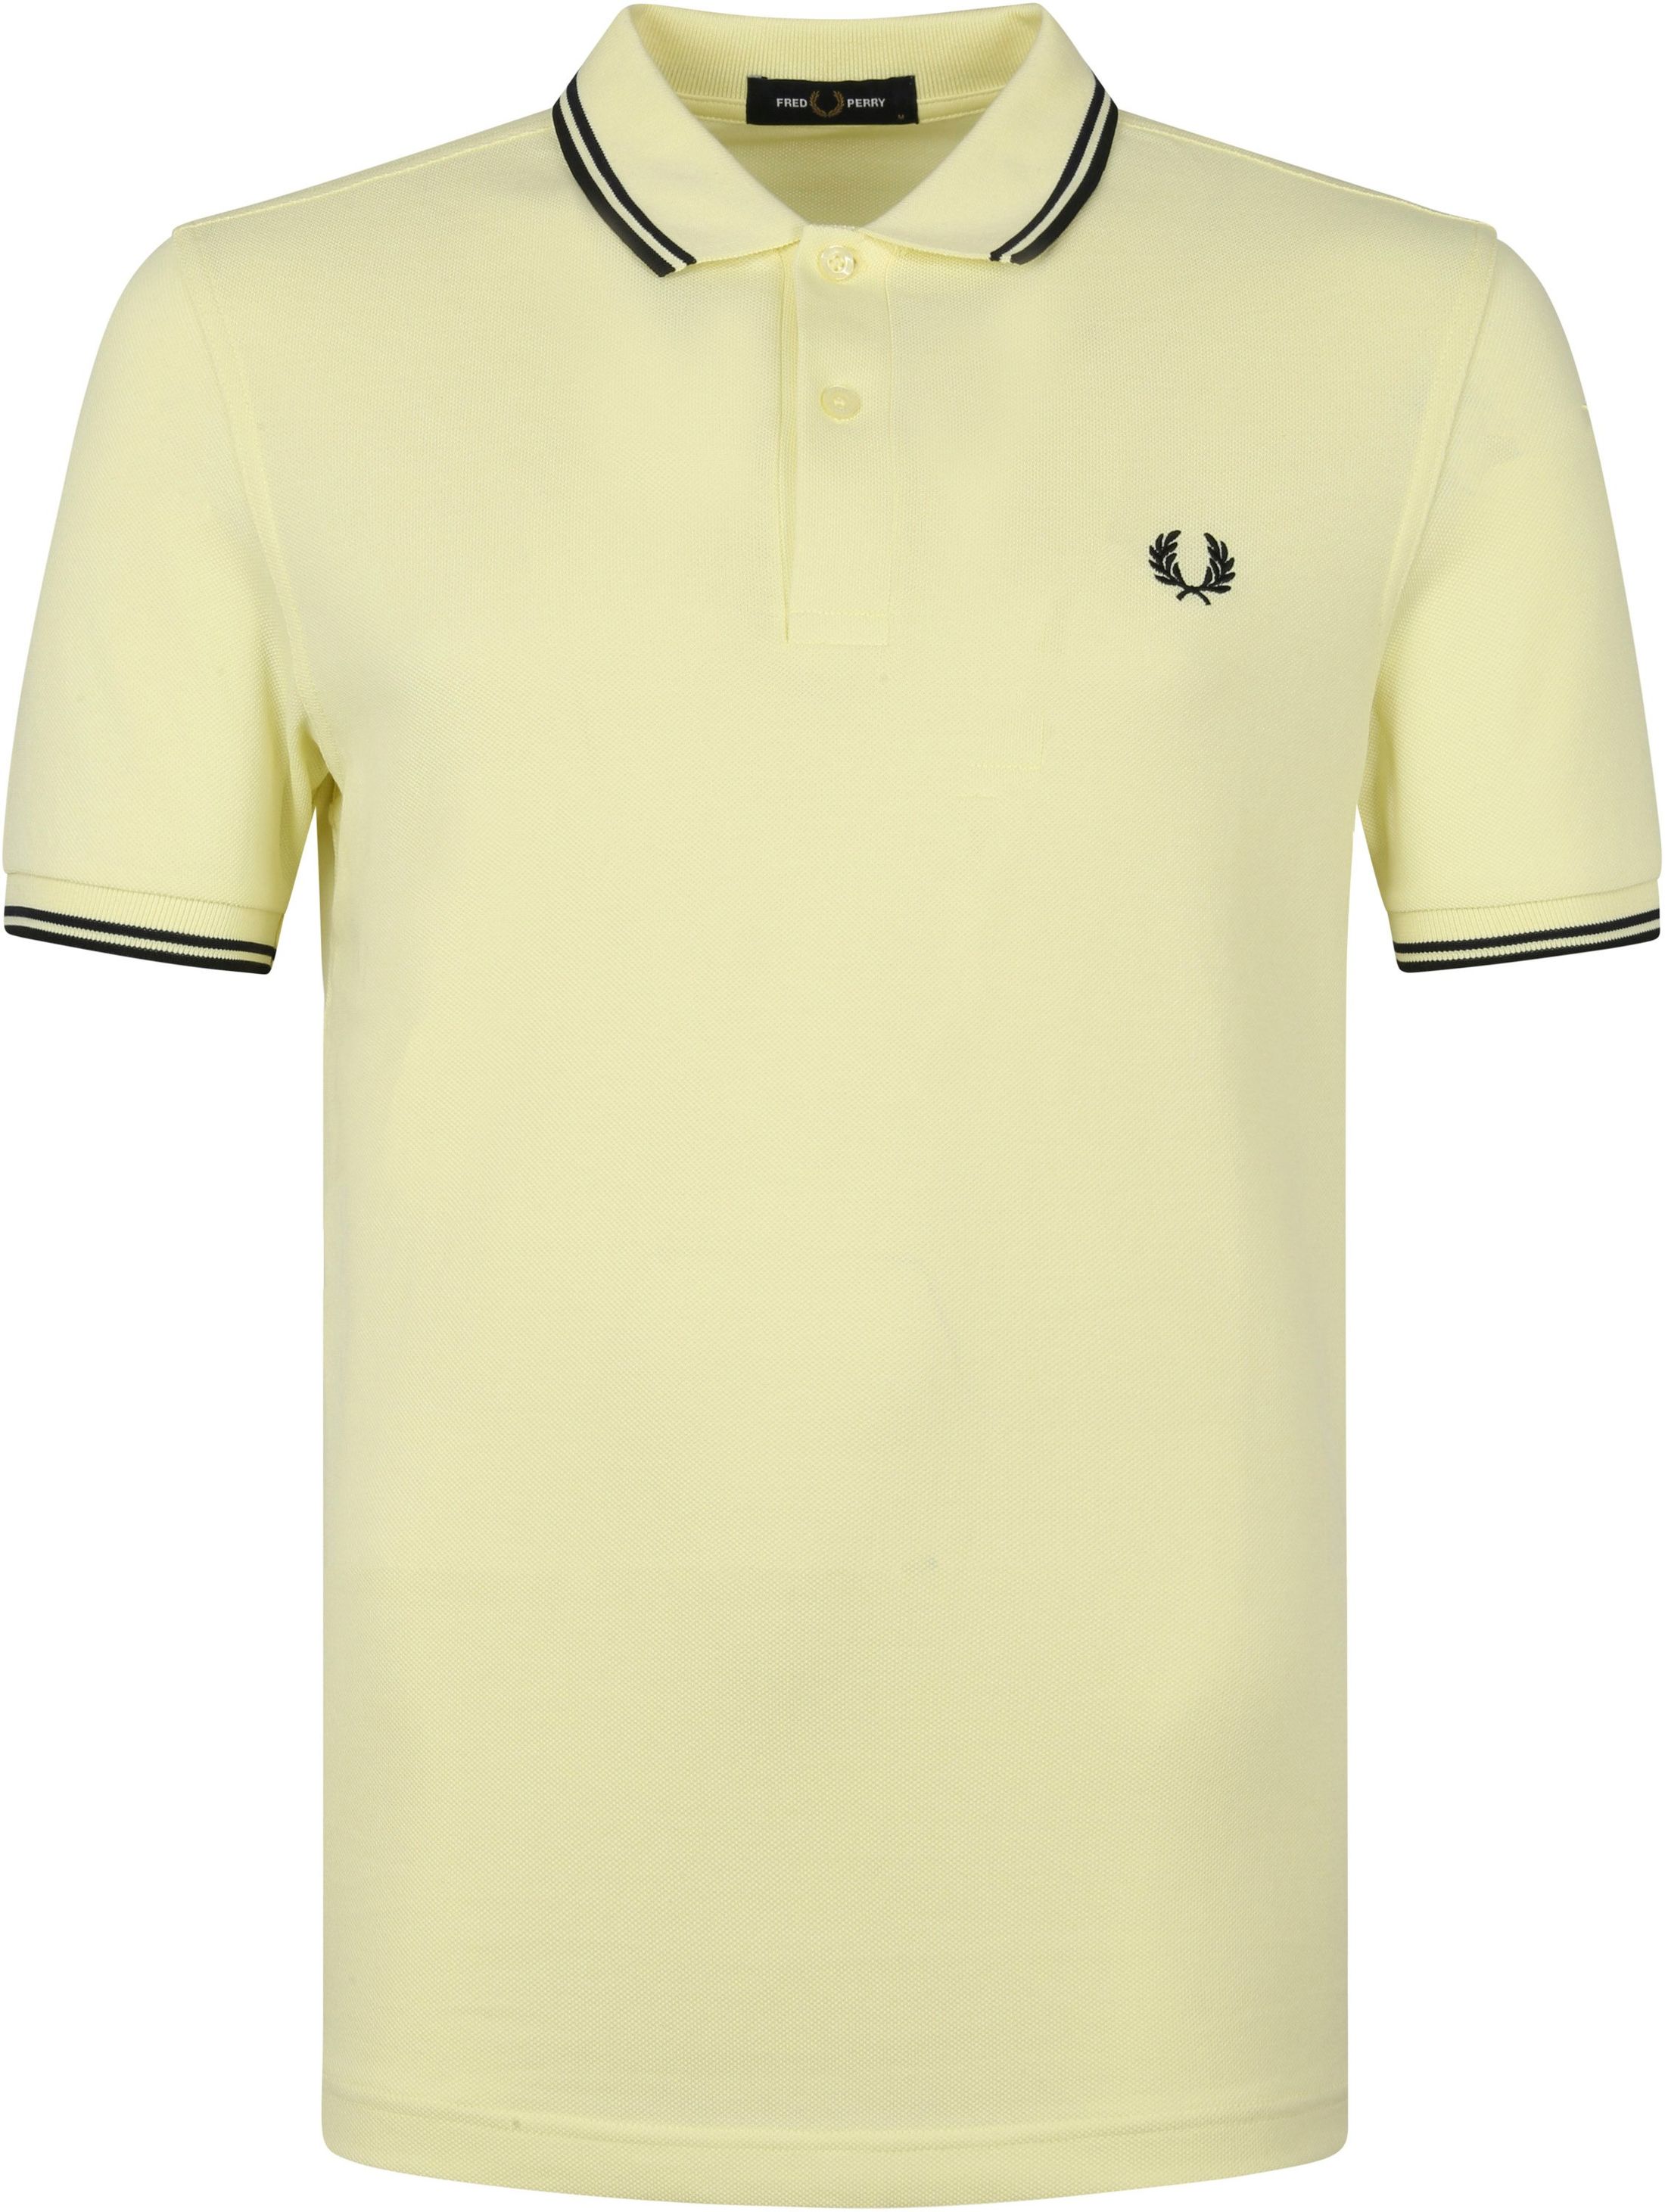 Fred Perry Polo M3600 Tipped Yellow size L